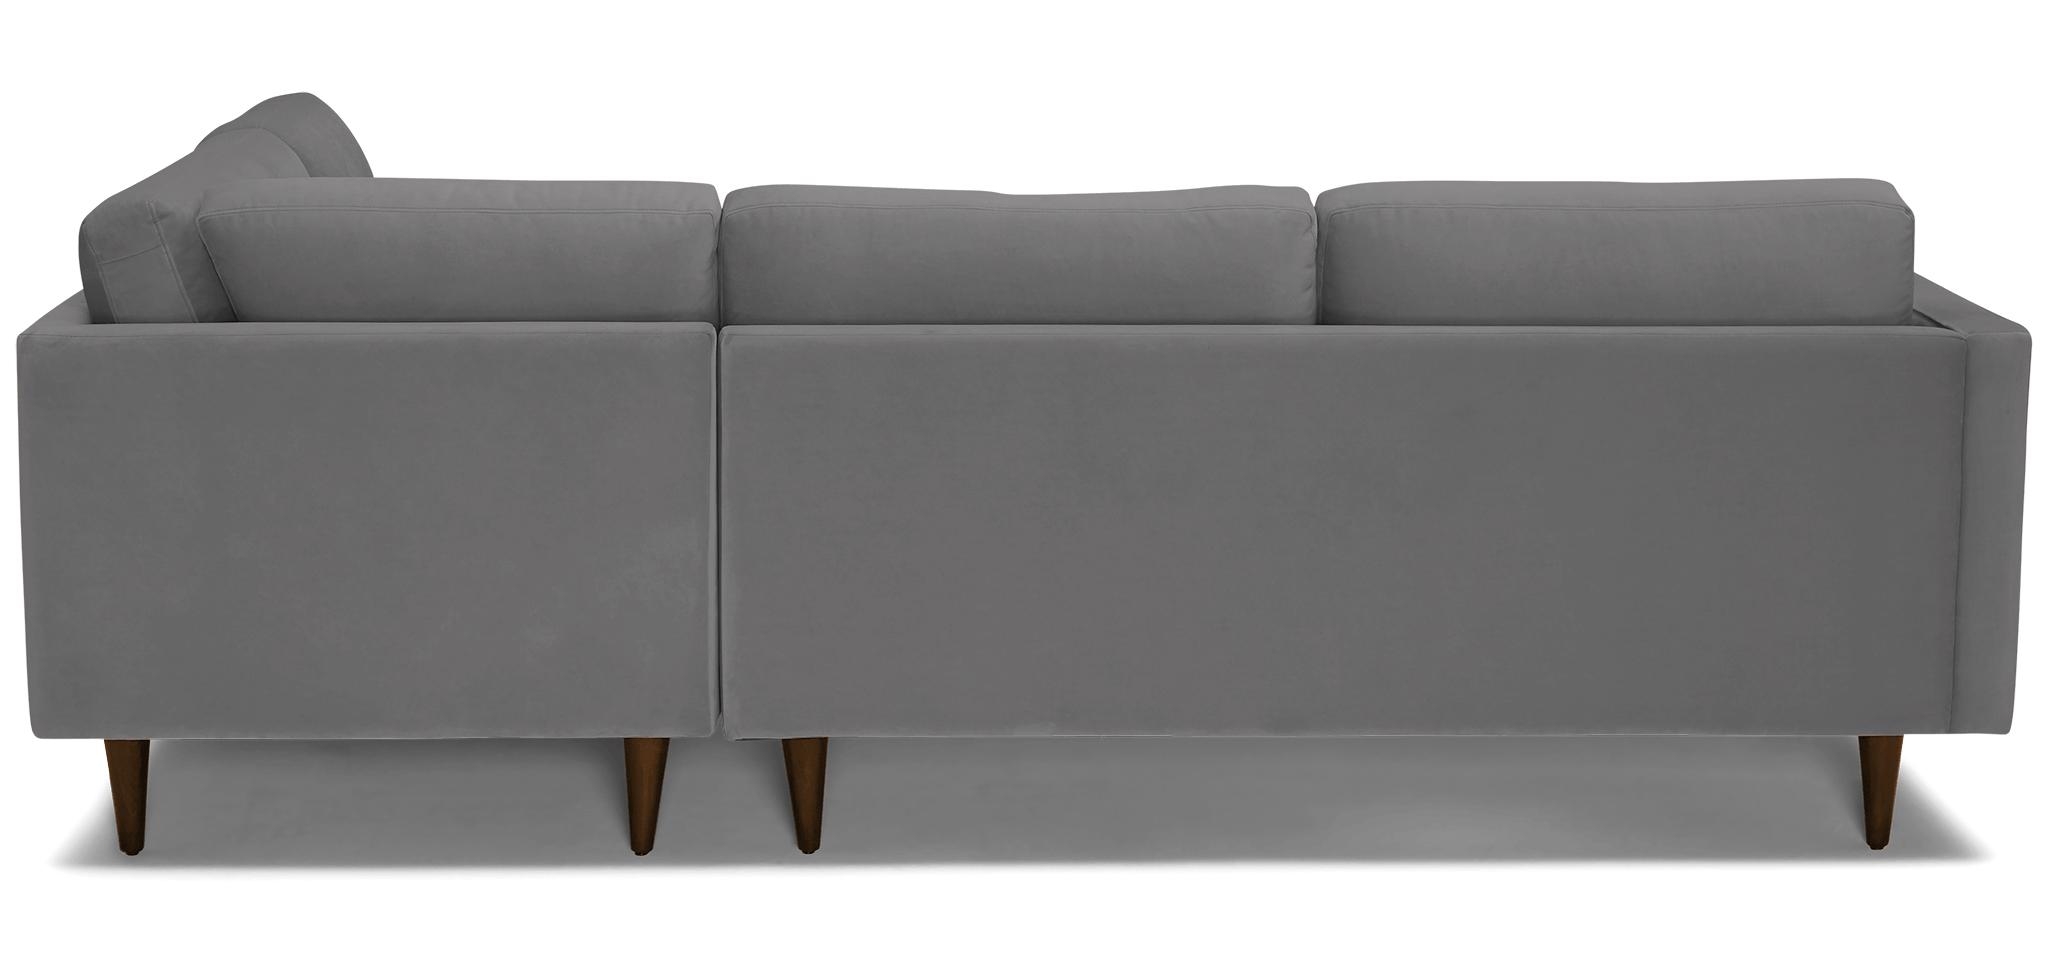 Gray Briar Mid Century Modern Sectional with Bumper - Royale Ash - Mocha - Right  - Image 4